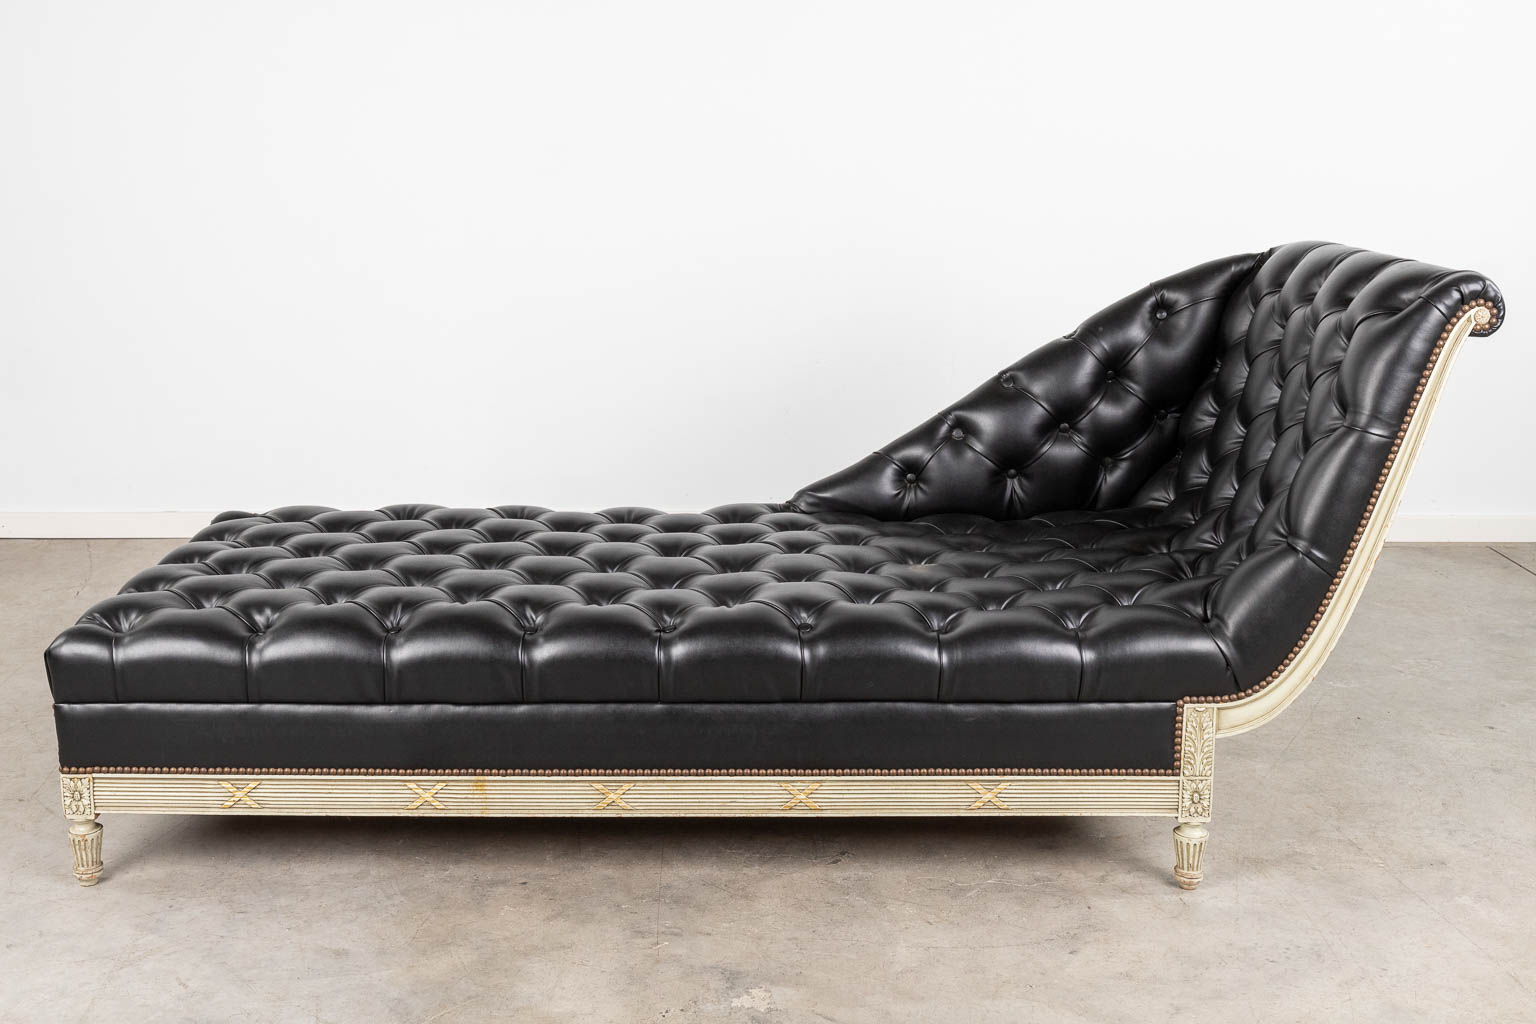 A white-patinated 'Chaise Longue', wood and leather in Louis XVI style. (L:76 x W:200 x H:87 cm) - Image 3 of 12